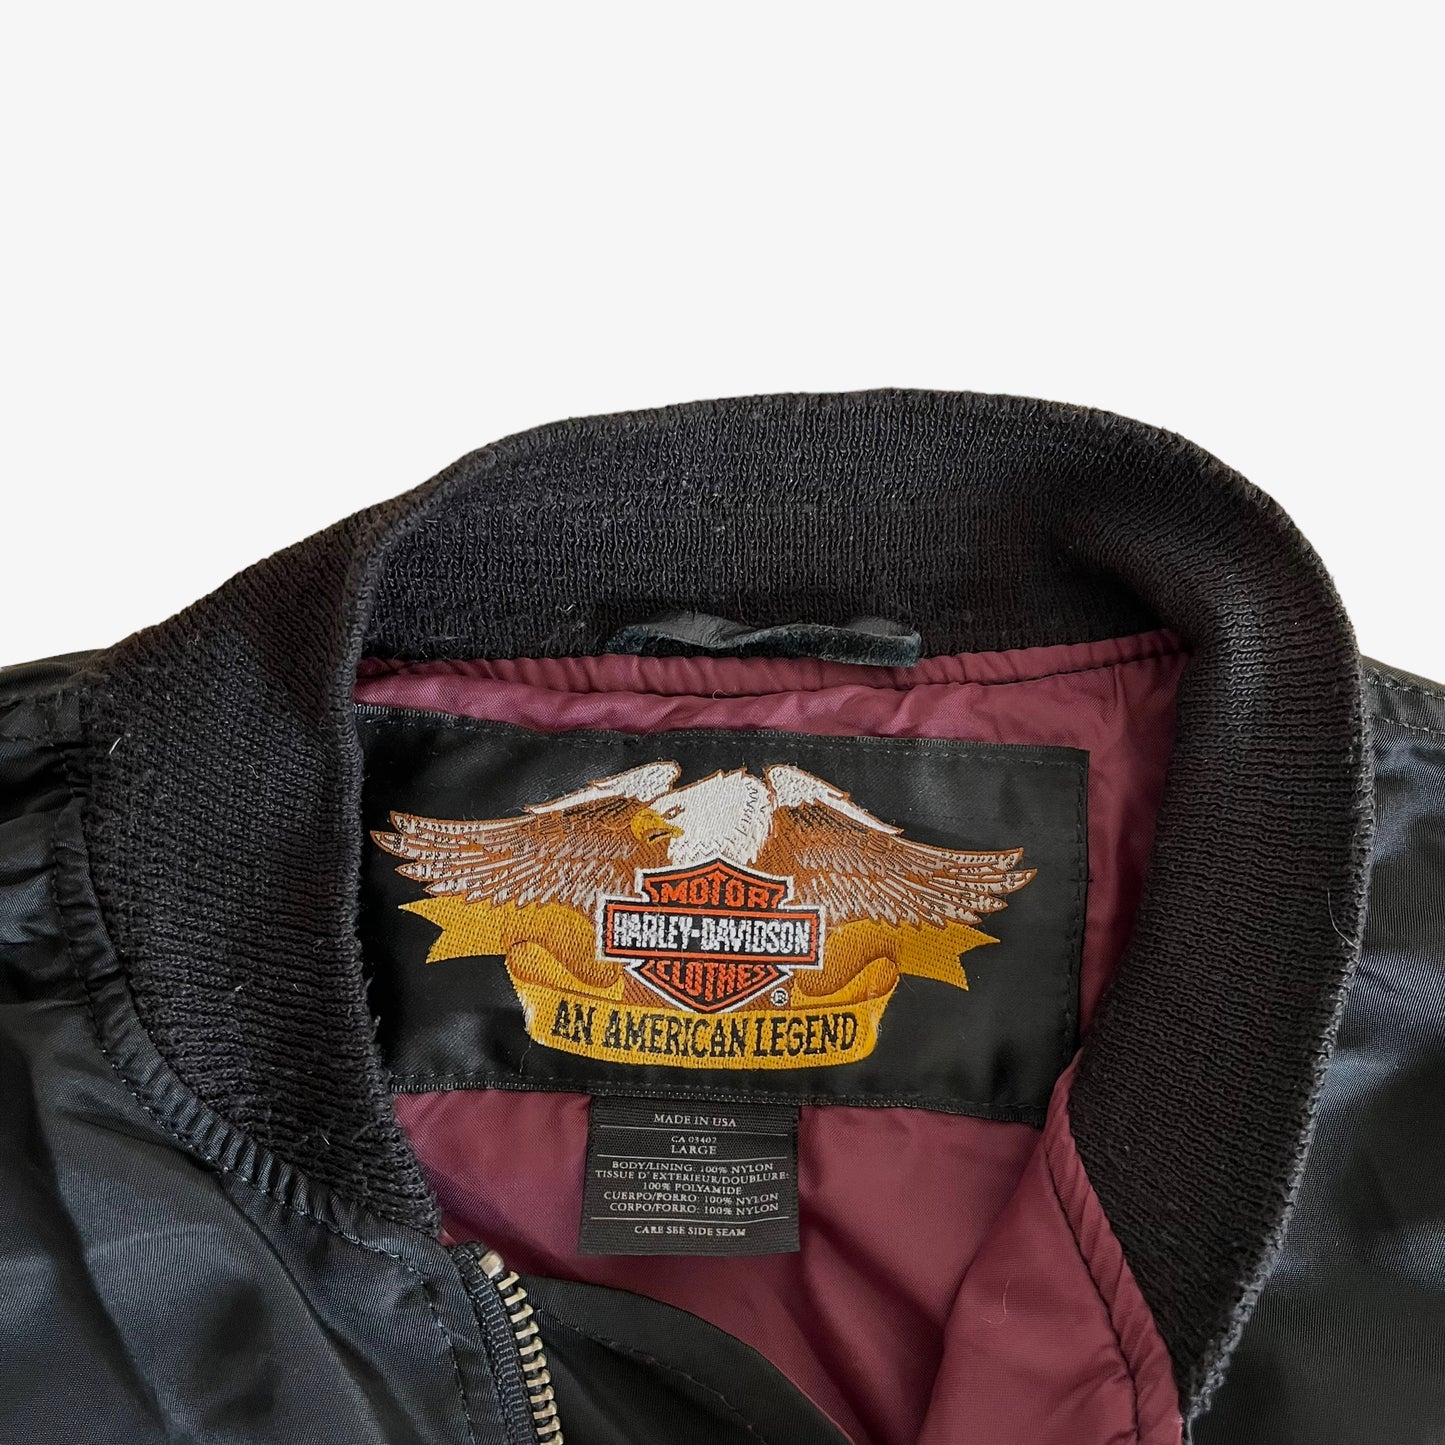 Vintage 1998 Harley Davidson 95th Anniversary Bomber Jacket With Back Spell Out Label - Casspios Dream